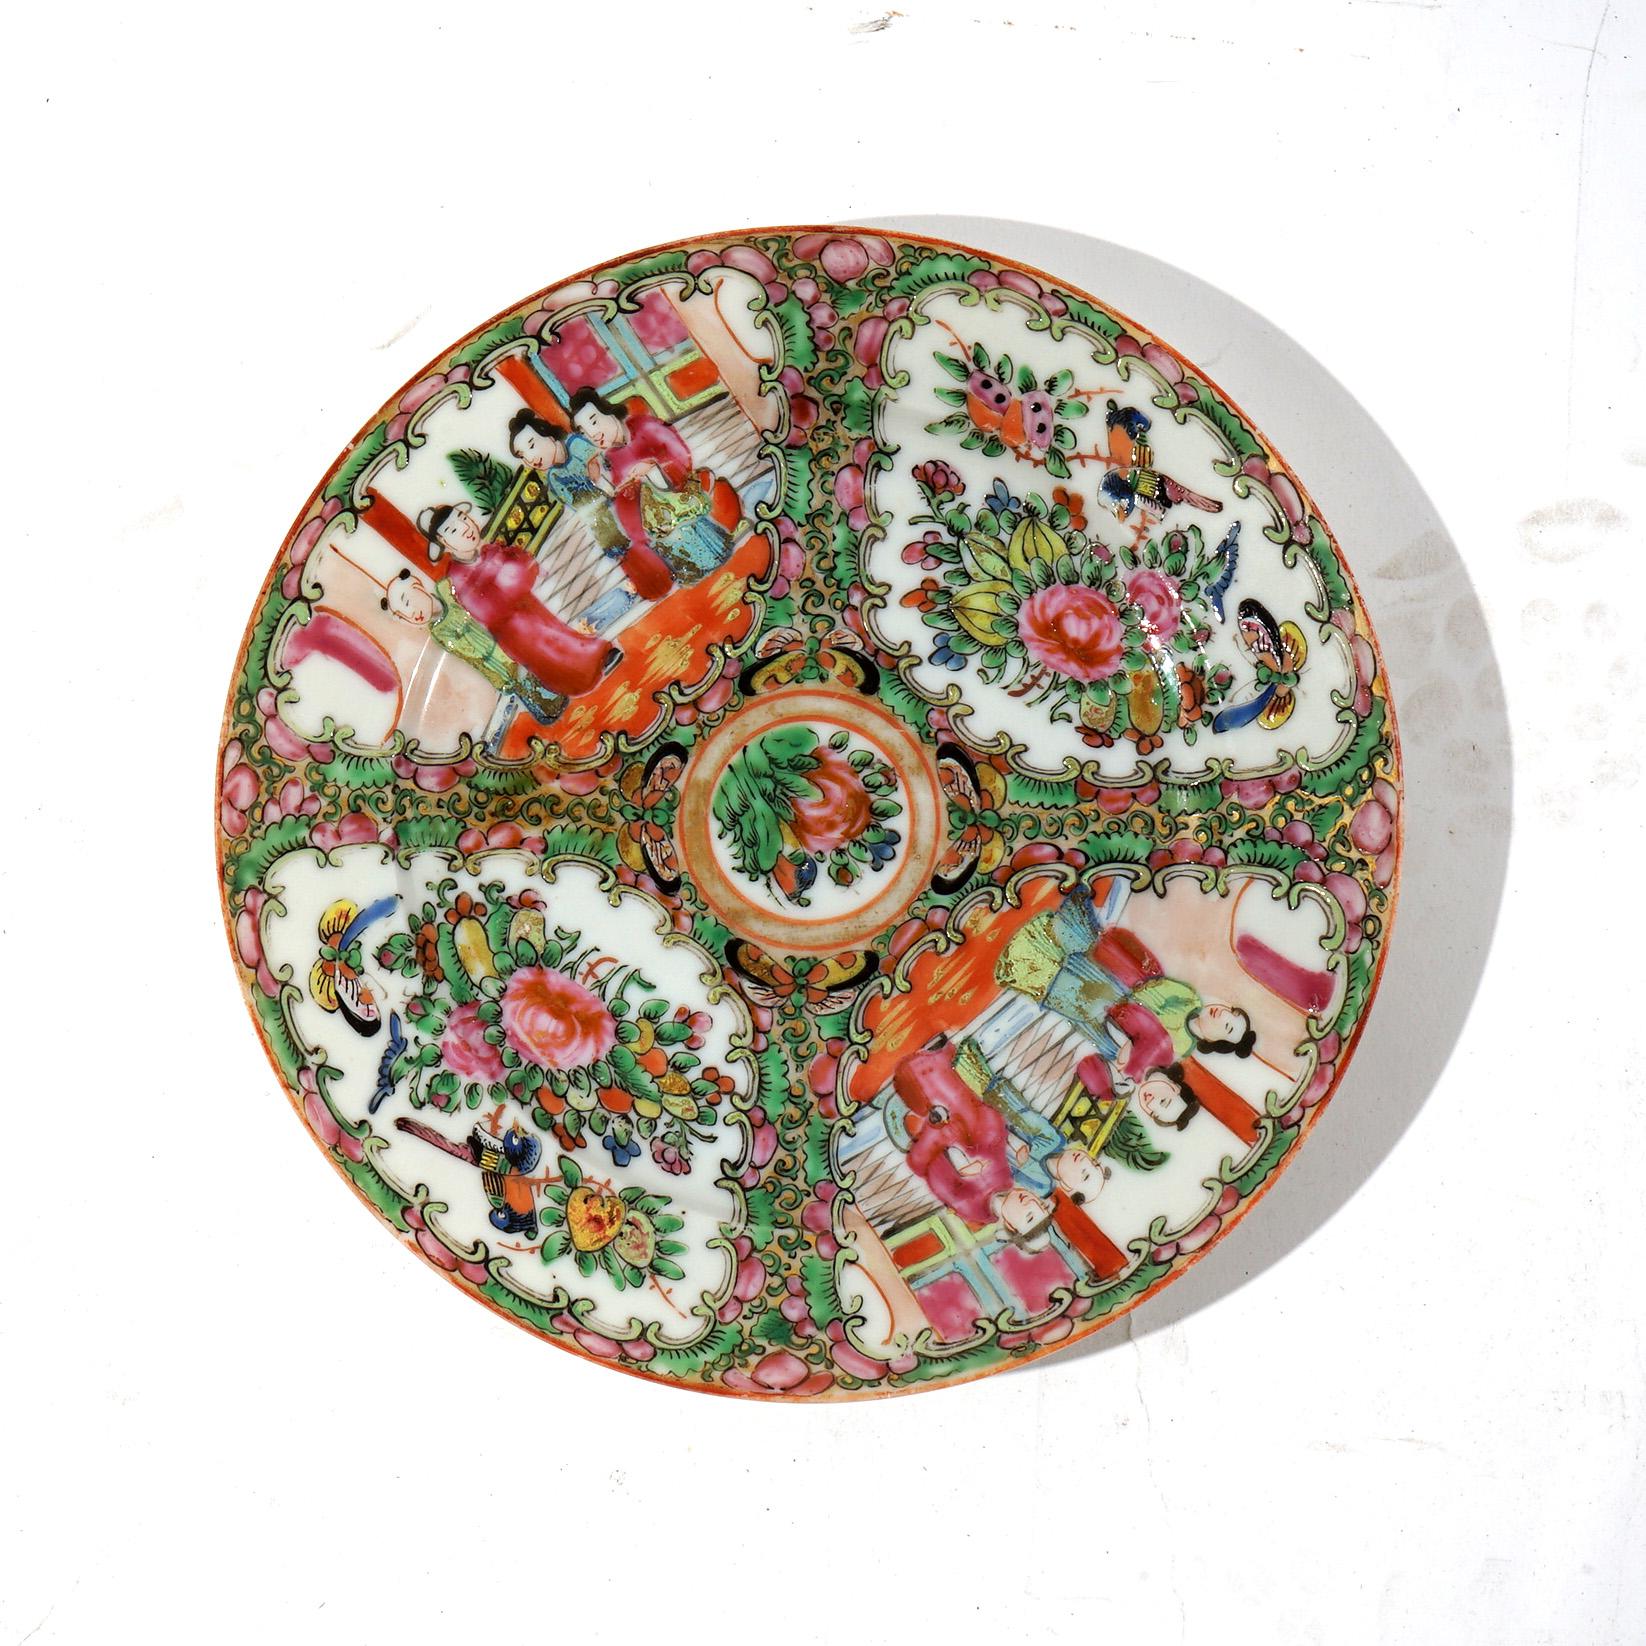 20th Century Antique Chinese Rose Medallion Porcelain Plates with Gardens & Figures C1900 For Sale